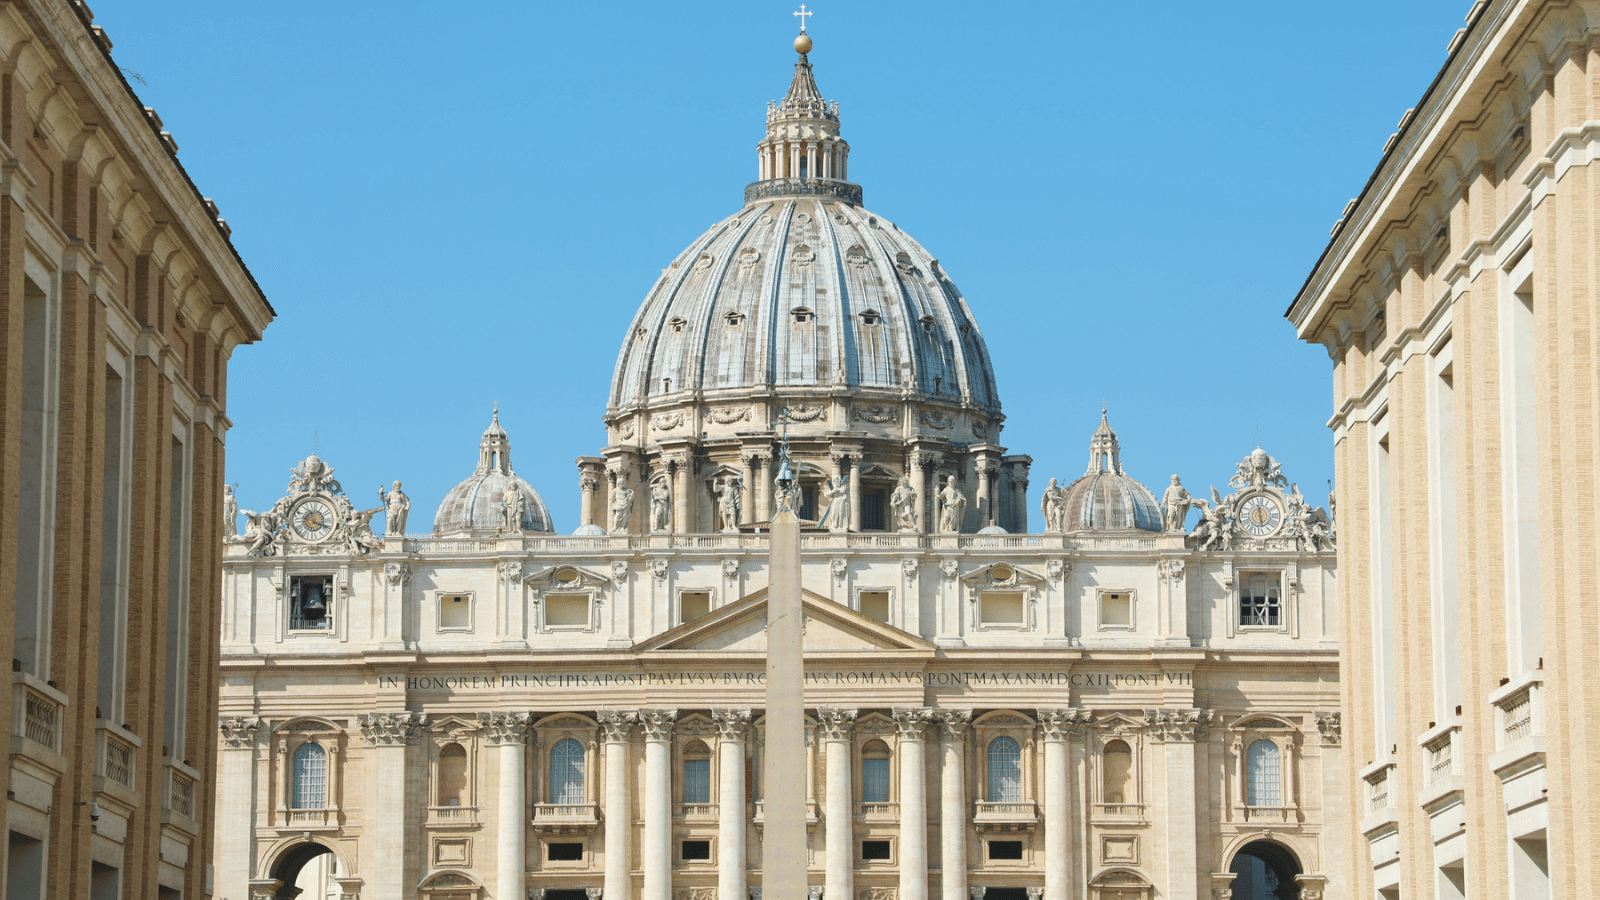 <p><span>St. Peter’s Basilica in Vatican City is one of the world’s largest and most beautiful churches. It was constructed over the grave of St. Peter, one of Jesus Christ’s twelve apostles. Its grand dome, designed in part by Michelangelo, dominates the Vatican skyline. </span></p>